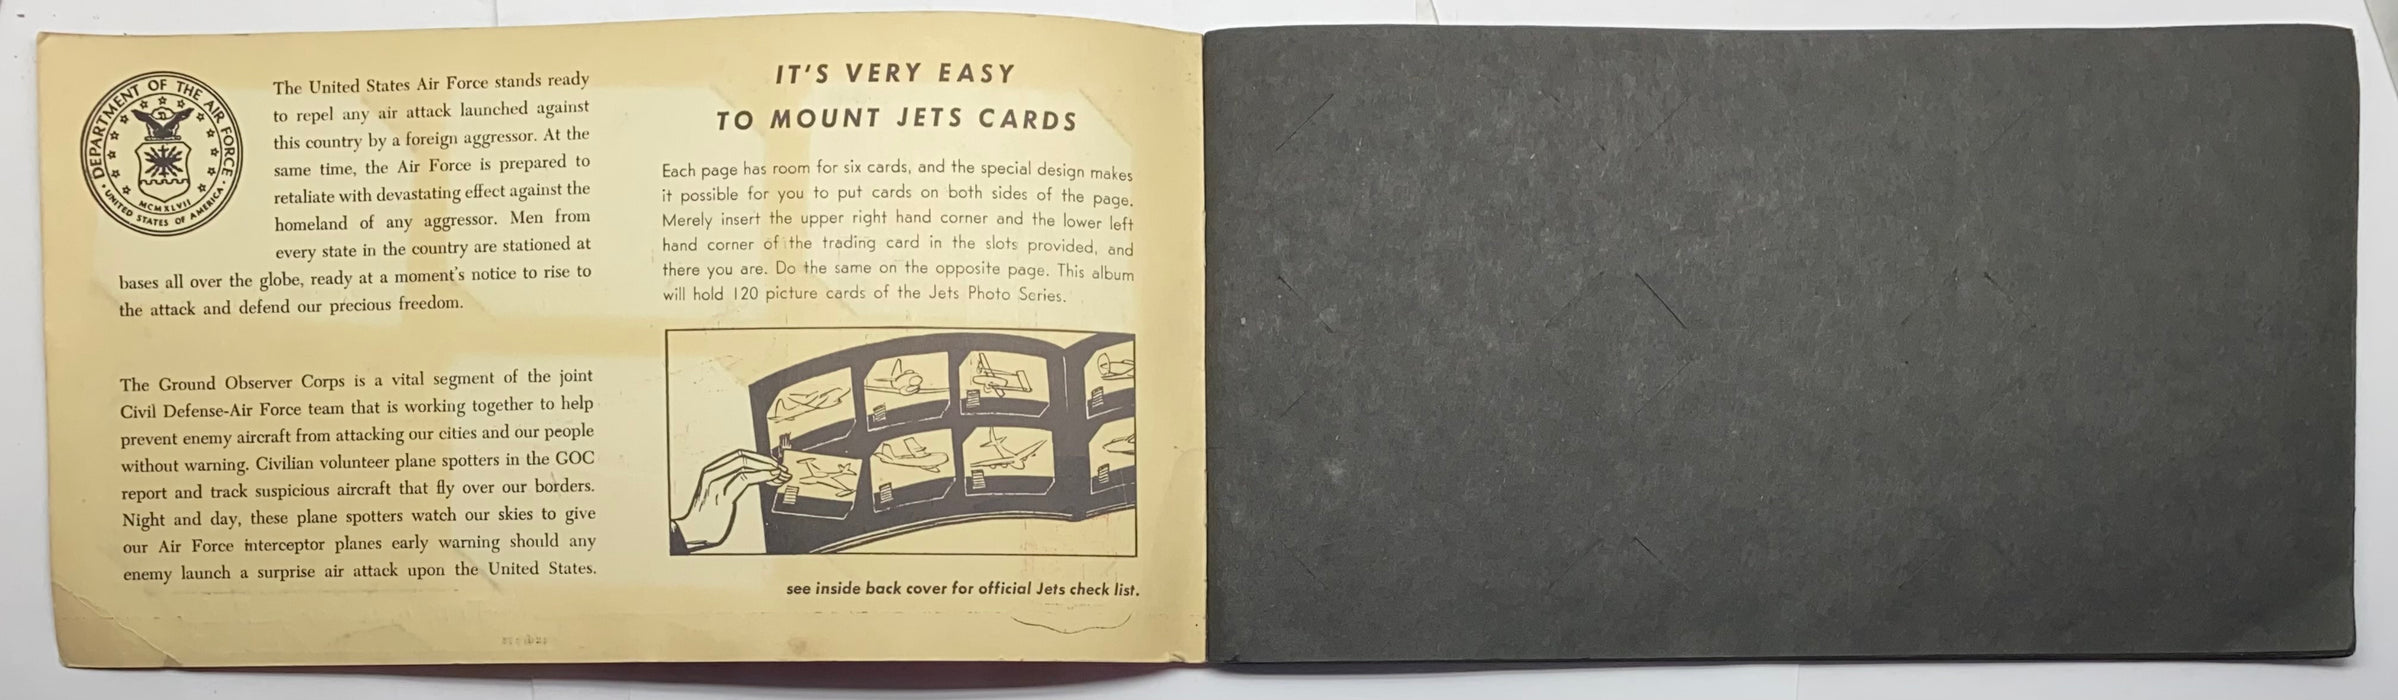 1956 Jets Topps TCG Vintage Trading Card Photo Album for Card Set   - TvMovieCards.com